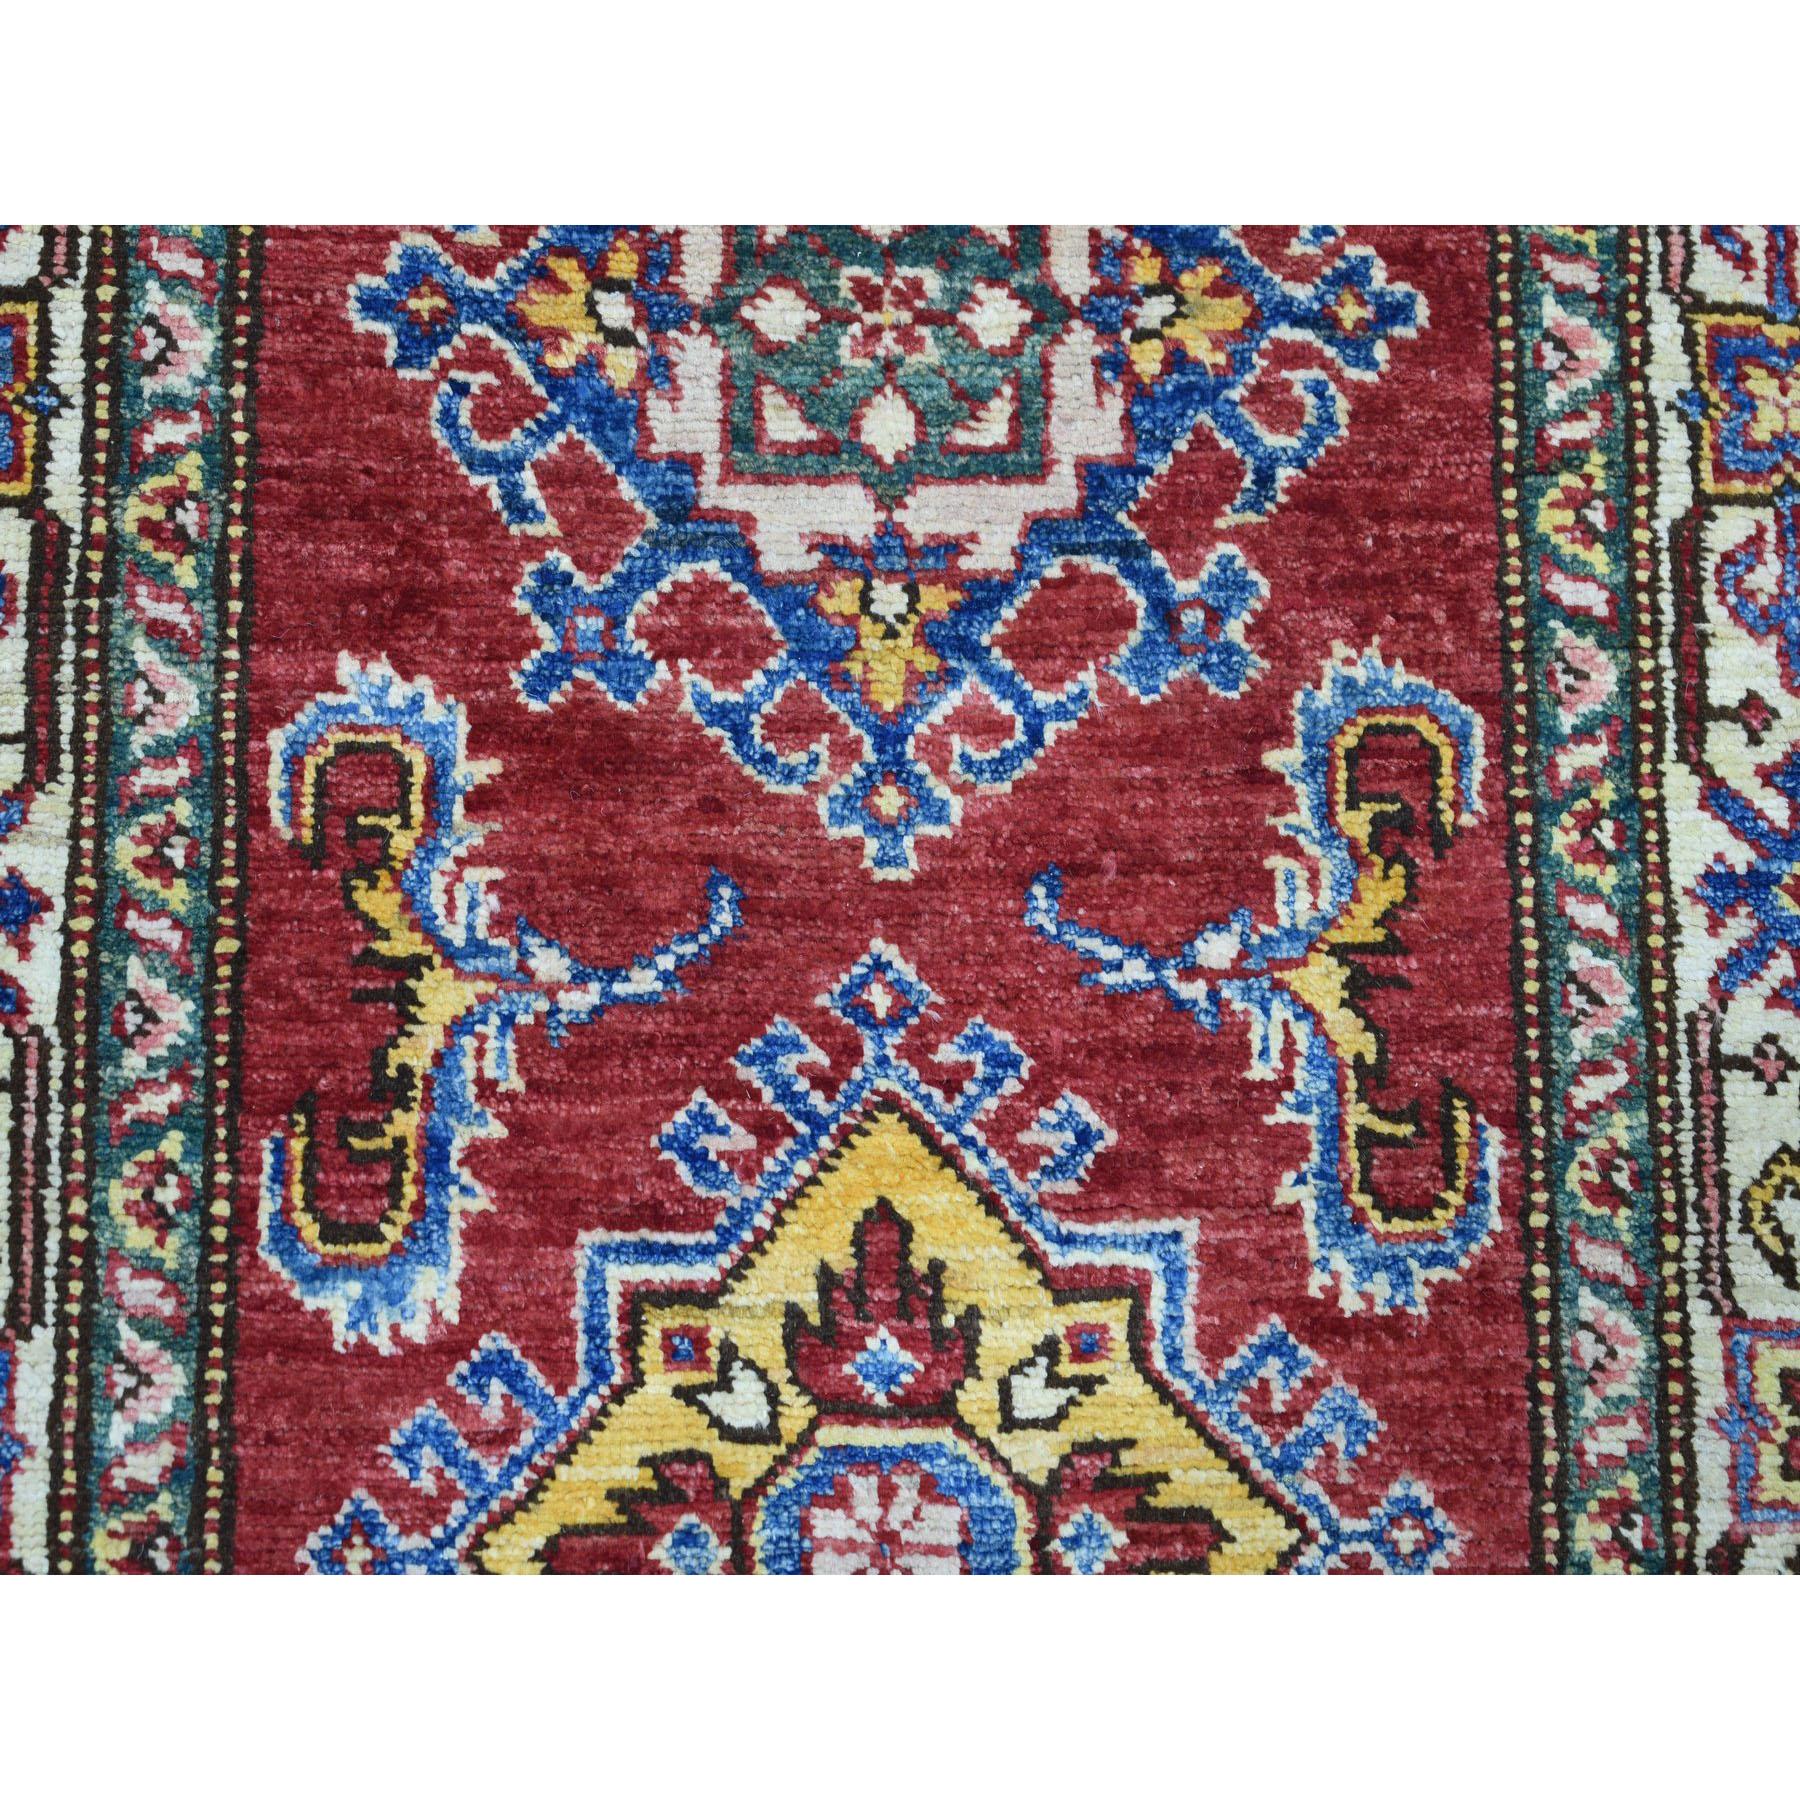 Afghan Red Super Kazak Geometric Design Extra Large Runner Pure Wool Hand Knotted Rug